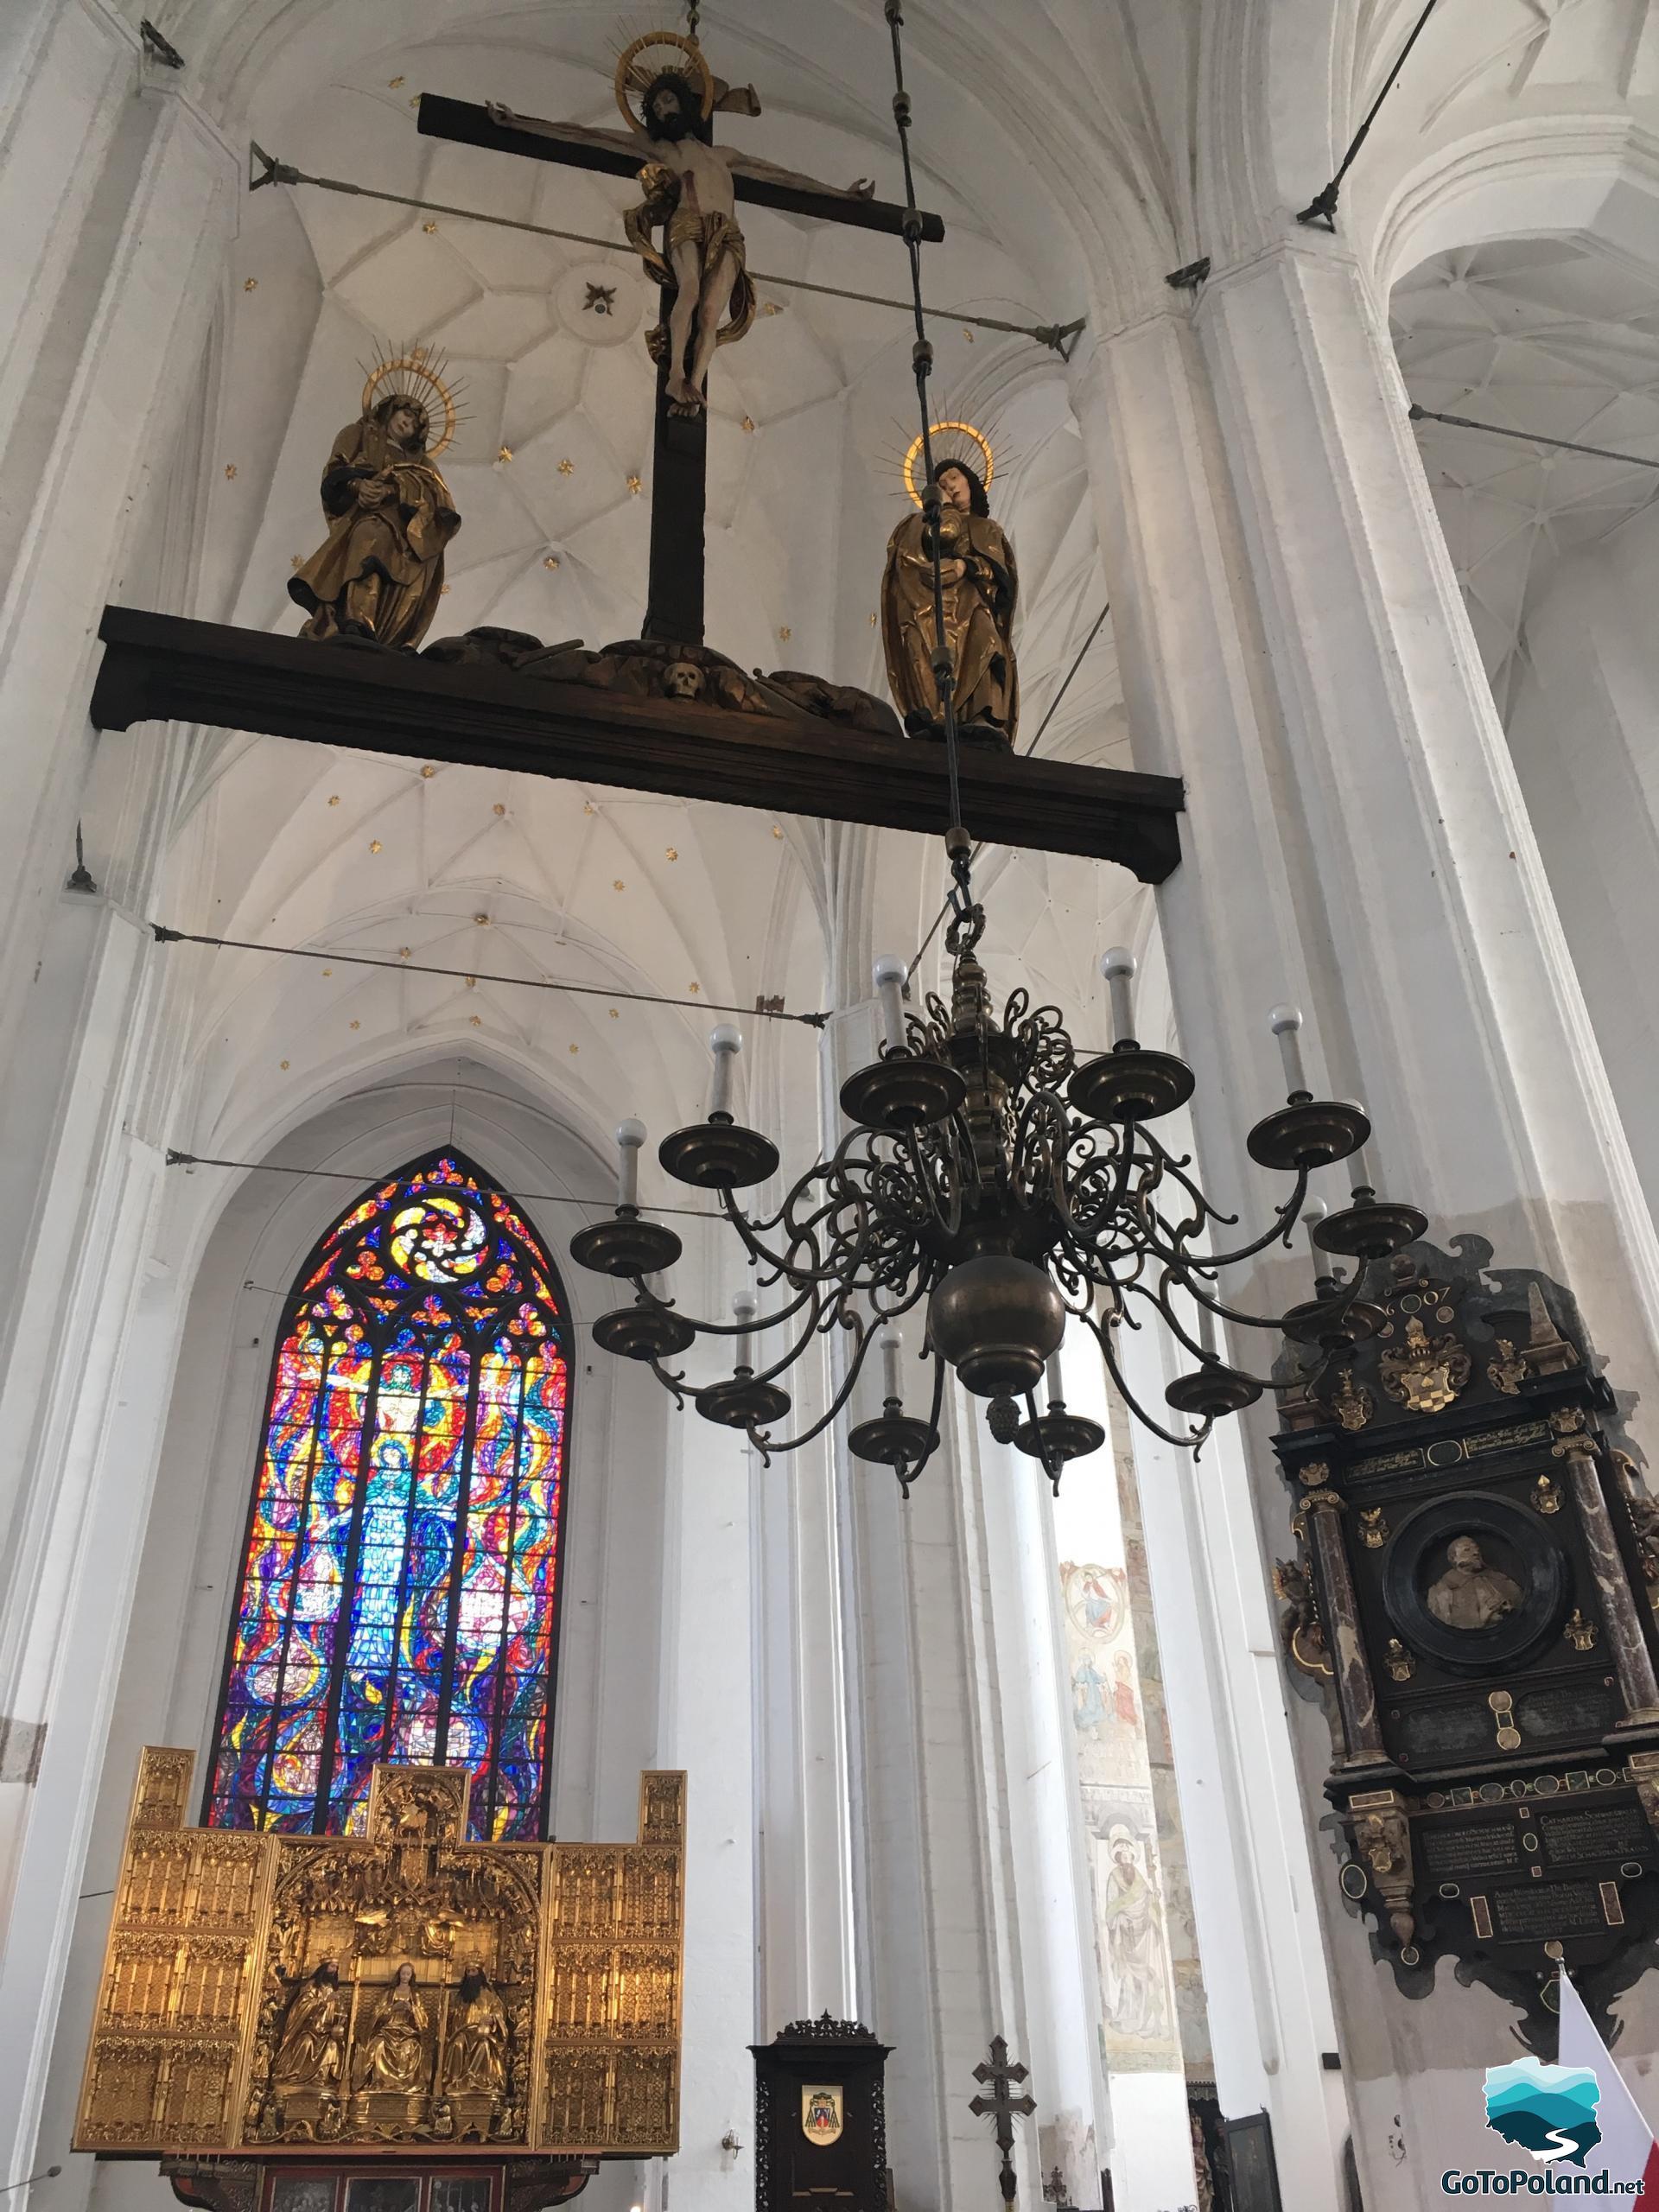 the interior of the basilica with a large colored stained glass window, a black chandelier, a golden triptych, the walls of the basilica are white, a cross with the crucified Christ hangs from the ceiling